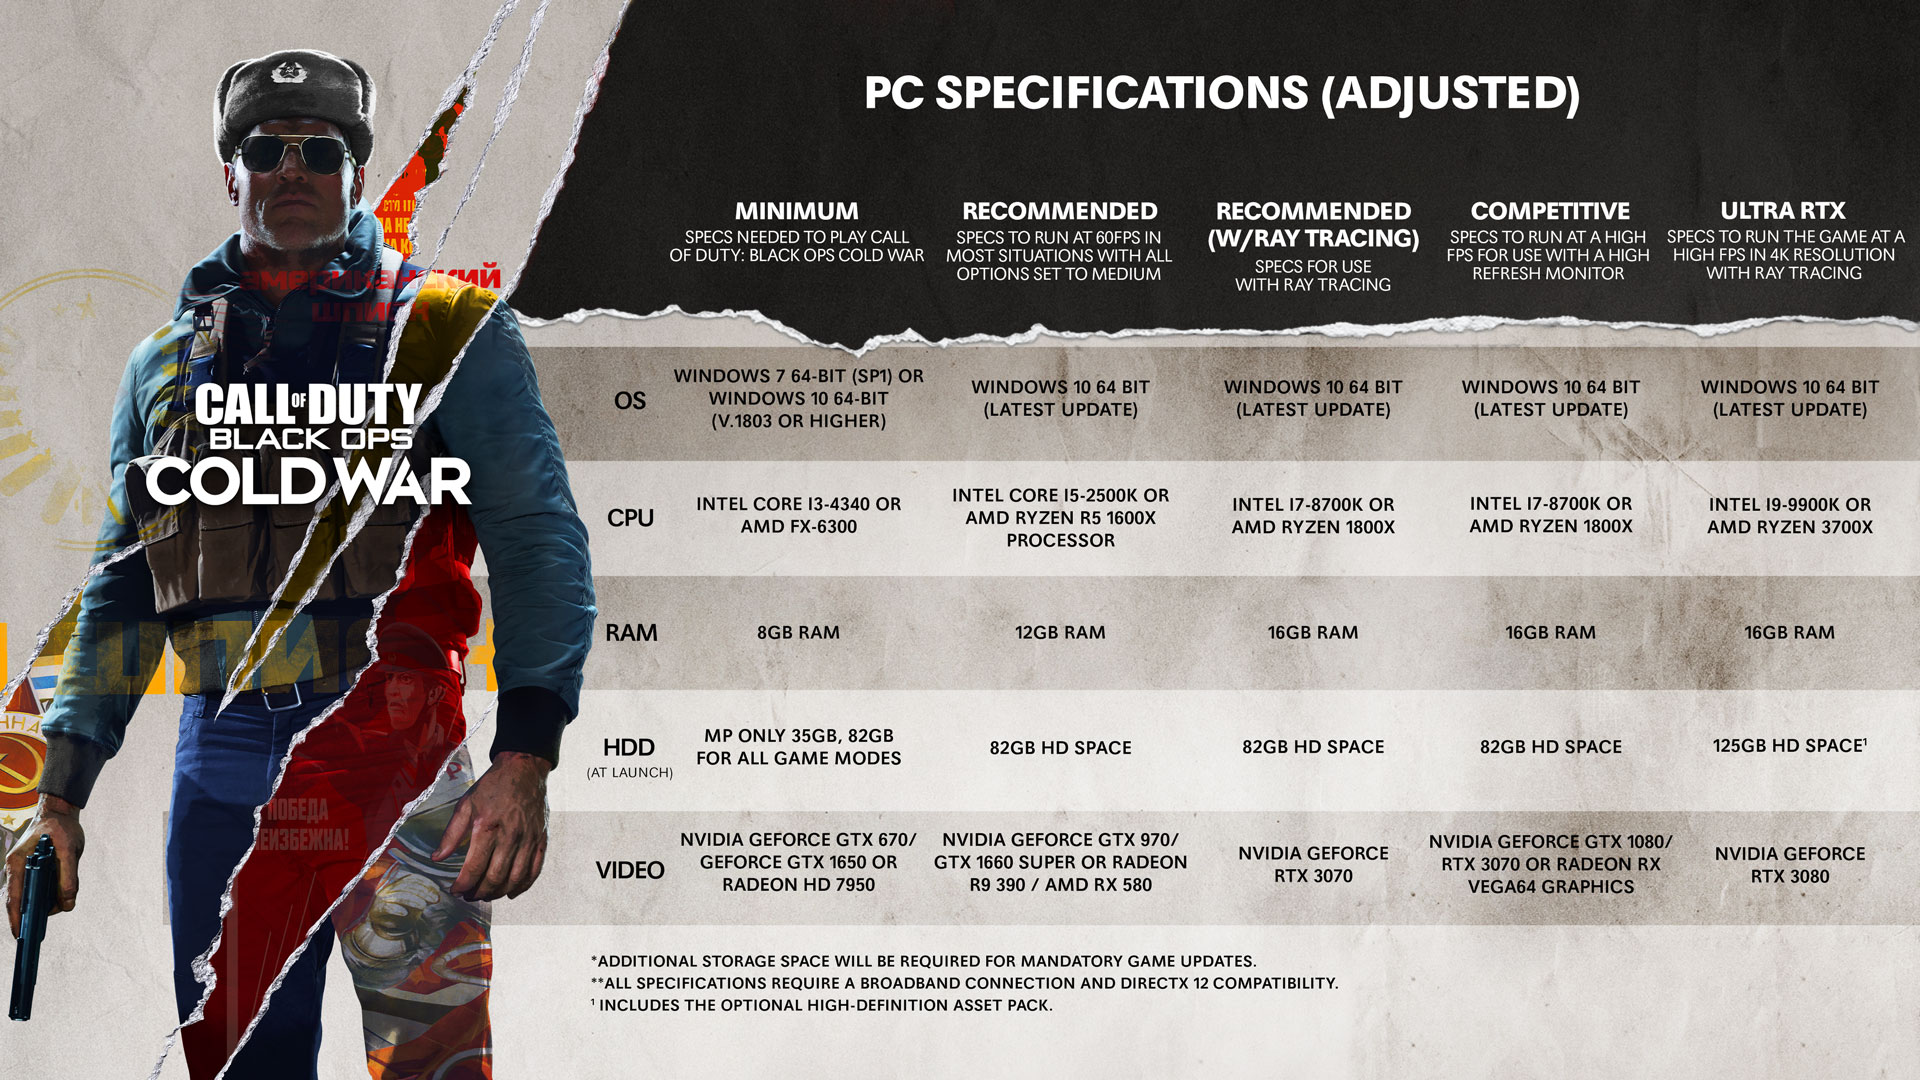 Call of Duty Modern Warfare 2: System requirements revealed